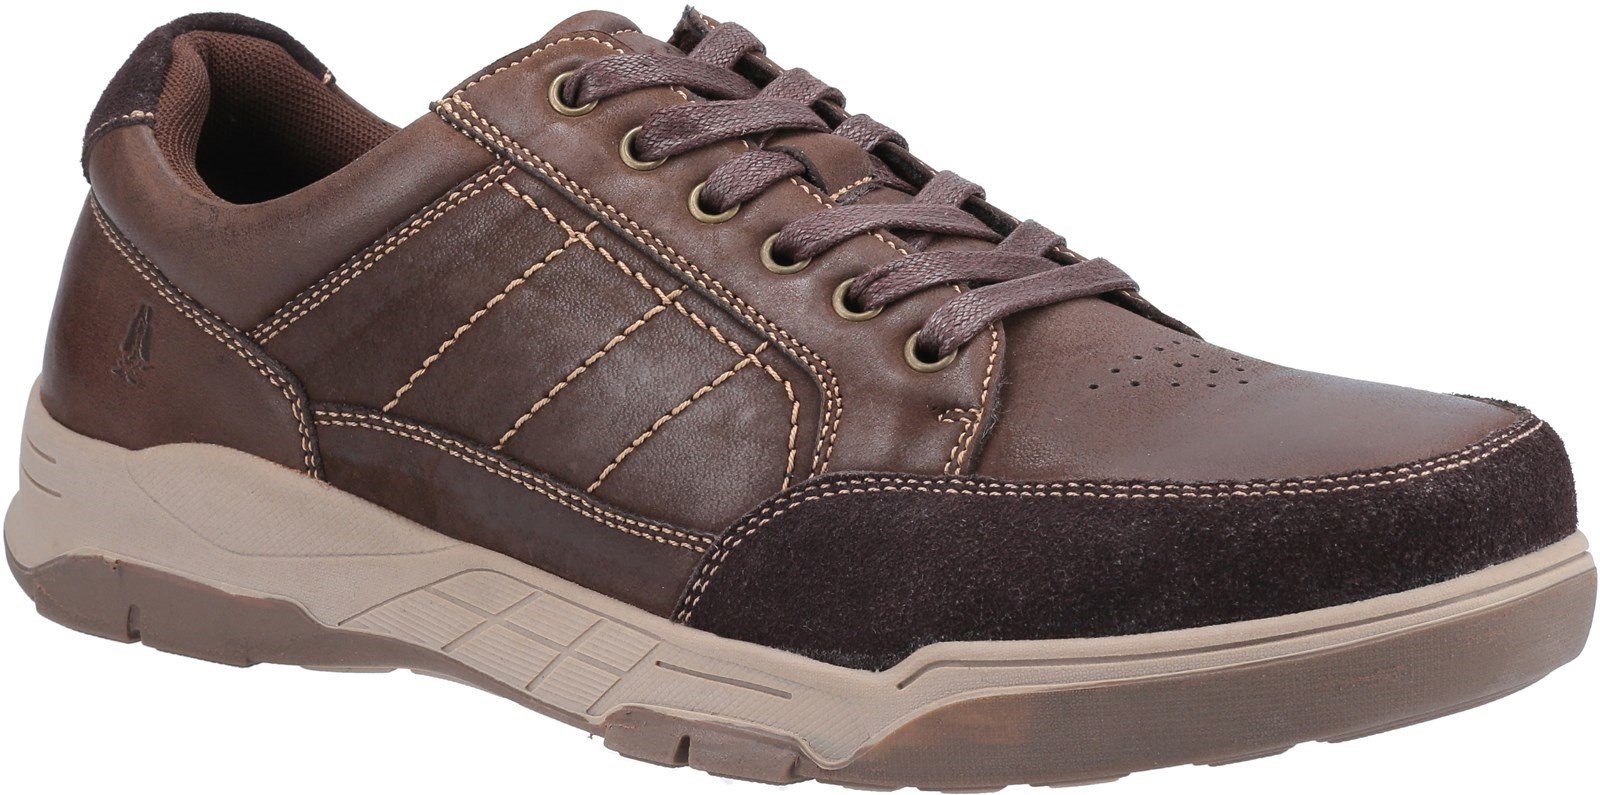 Hush Puppies Men's Finley Lace Trainer Various Colours 32011 - Coffee 7